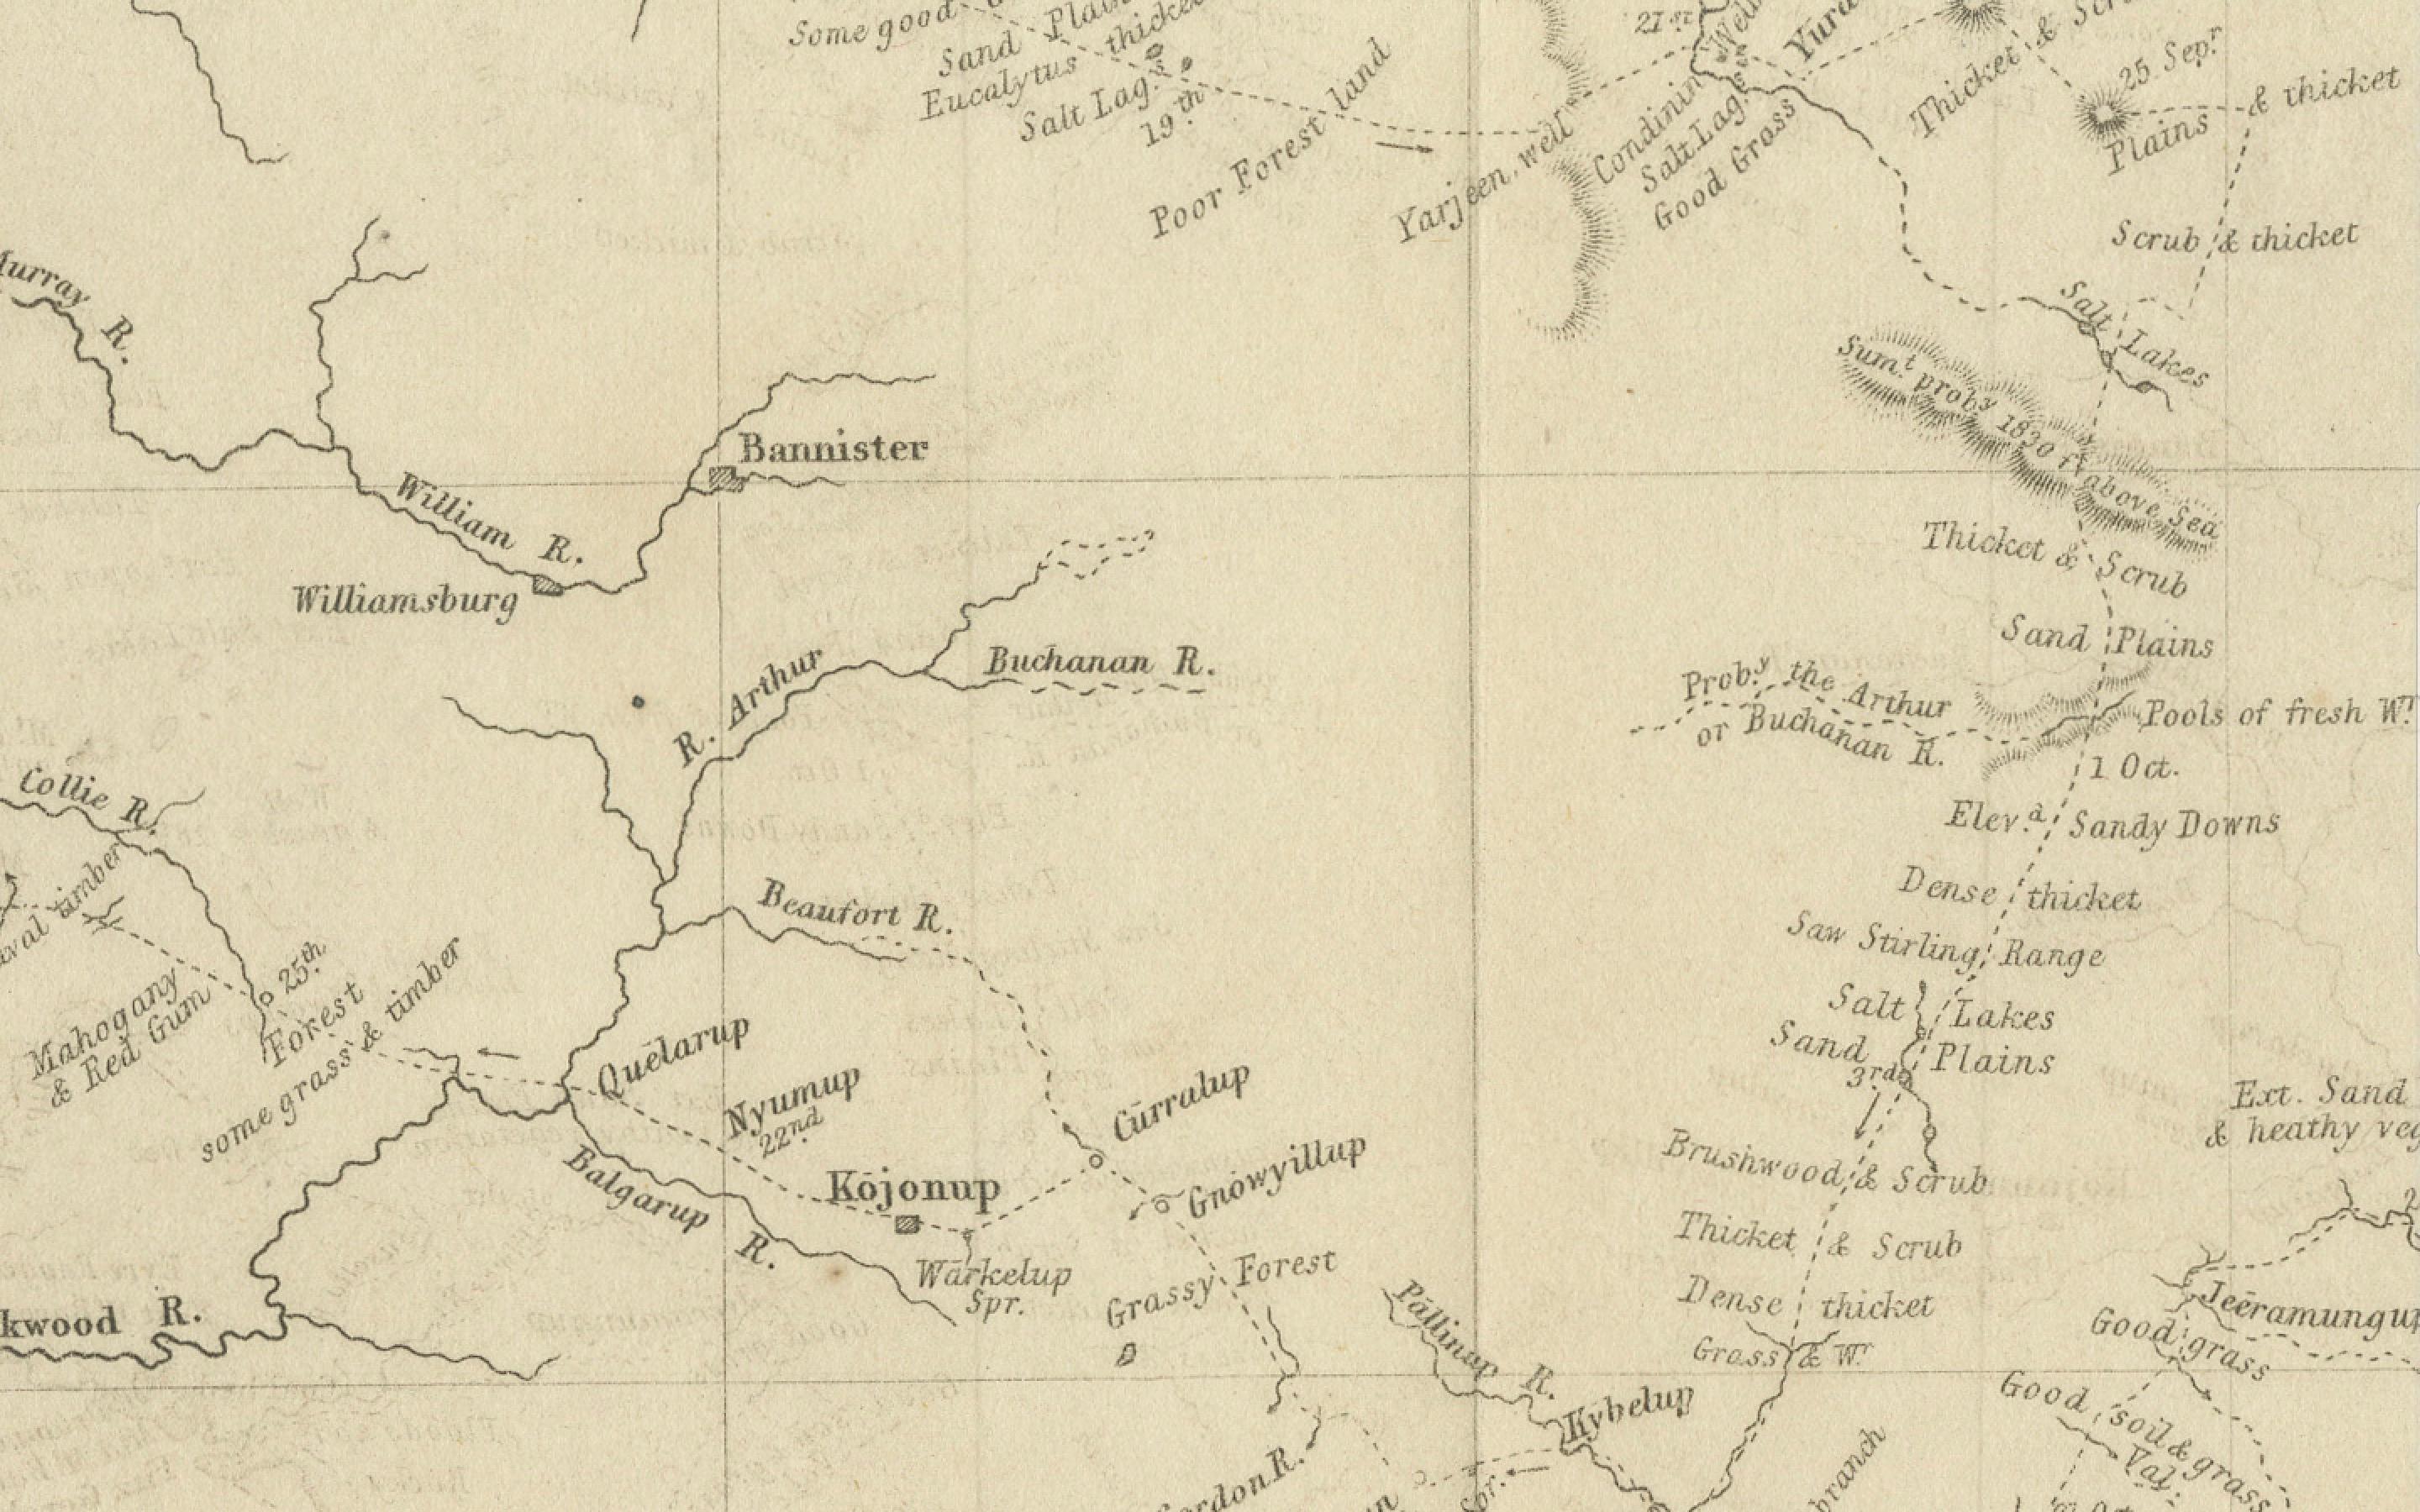 This map is a historical document, focused on Western Australia. It illustrates the route of an expedition under Surveyor General Roe from Perth to Russell Range during 1848 and 1849. 

The 1848-1849 expedition of John Septimus Roe to the Russell